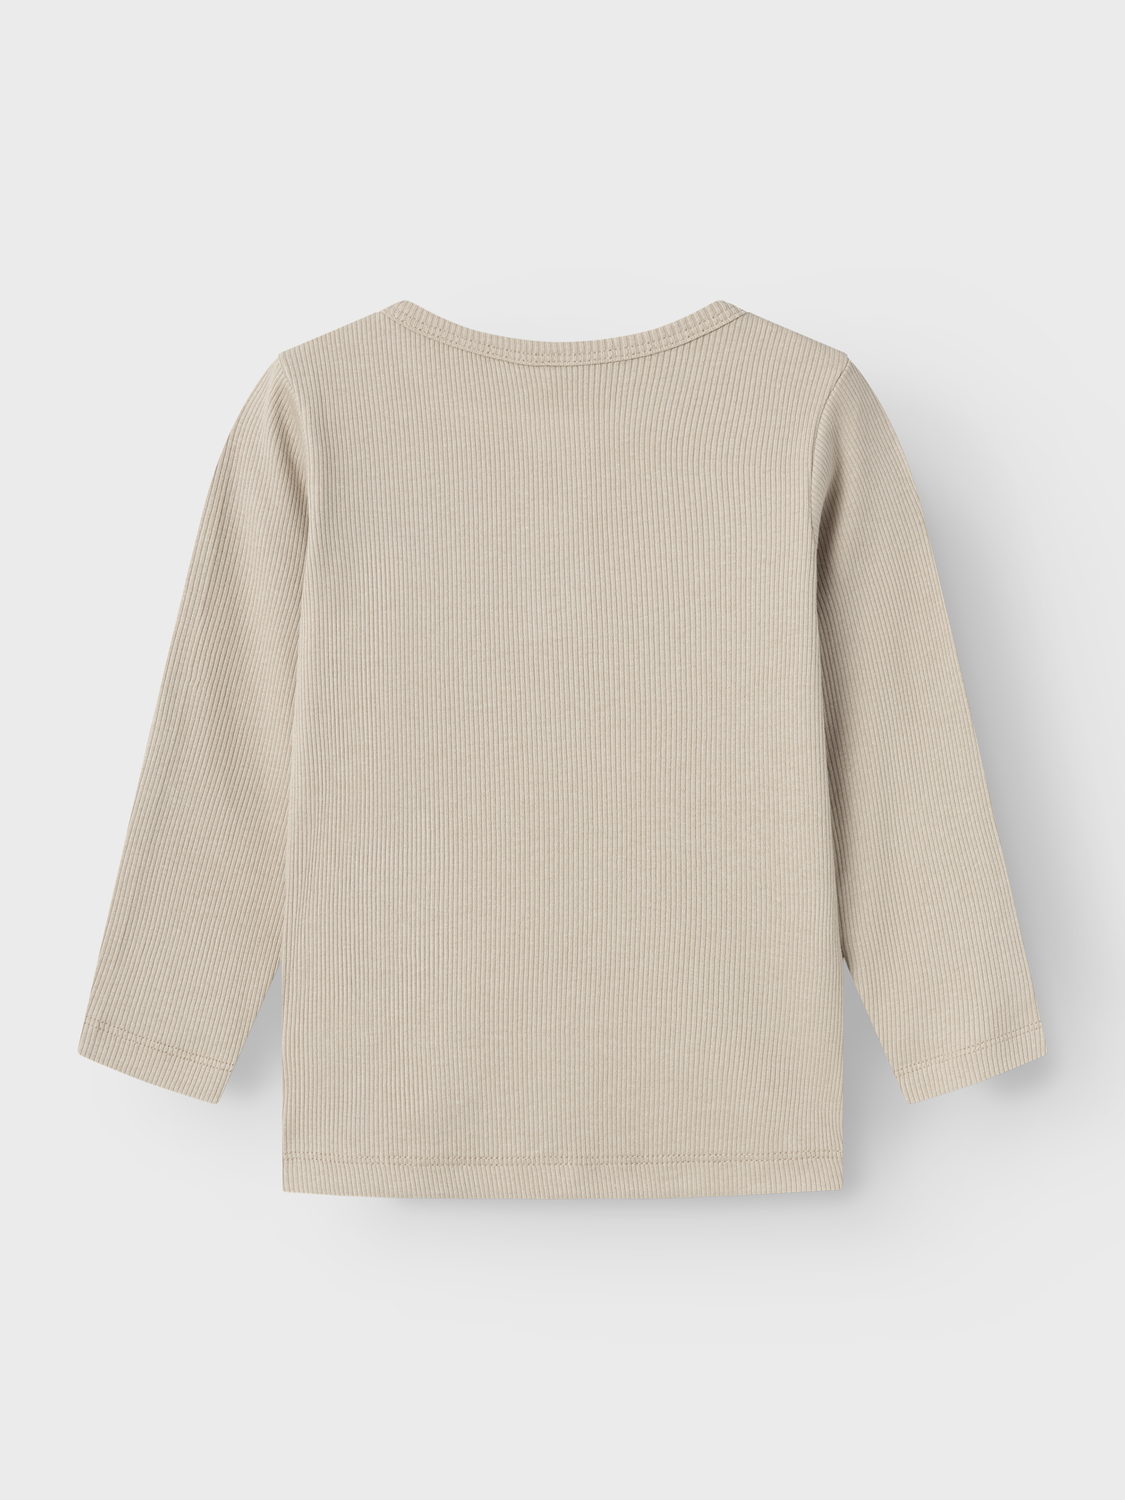 NMMKAB T-Shirts & Tops - Pure Cashmere